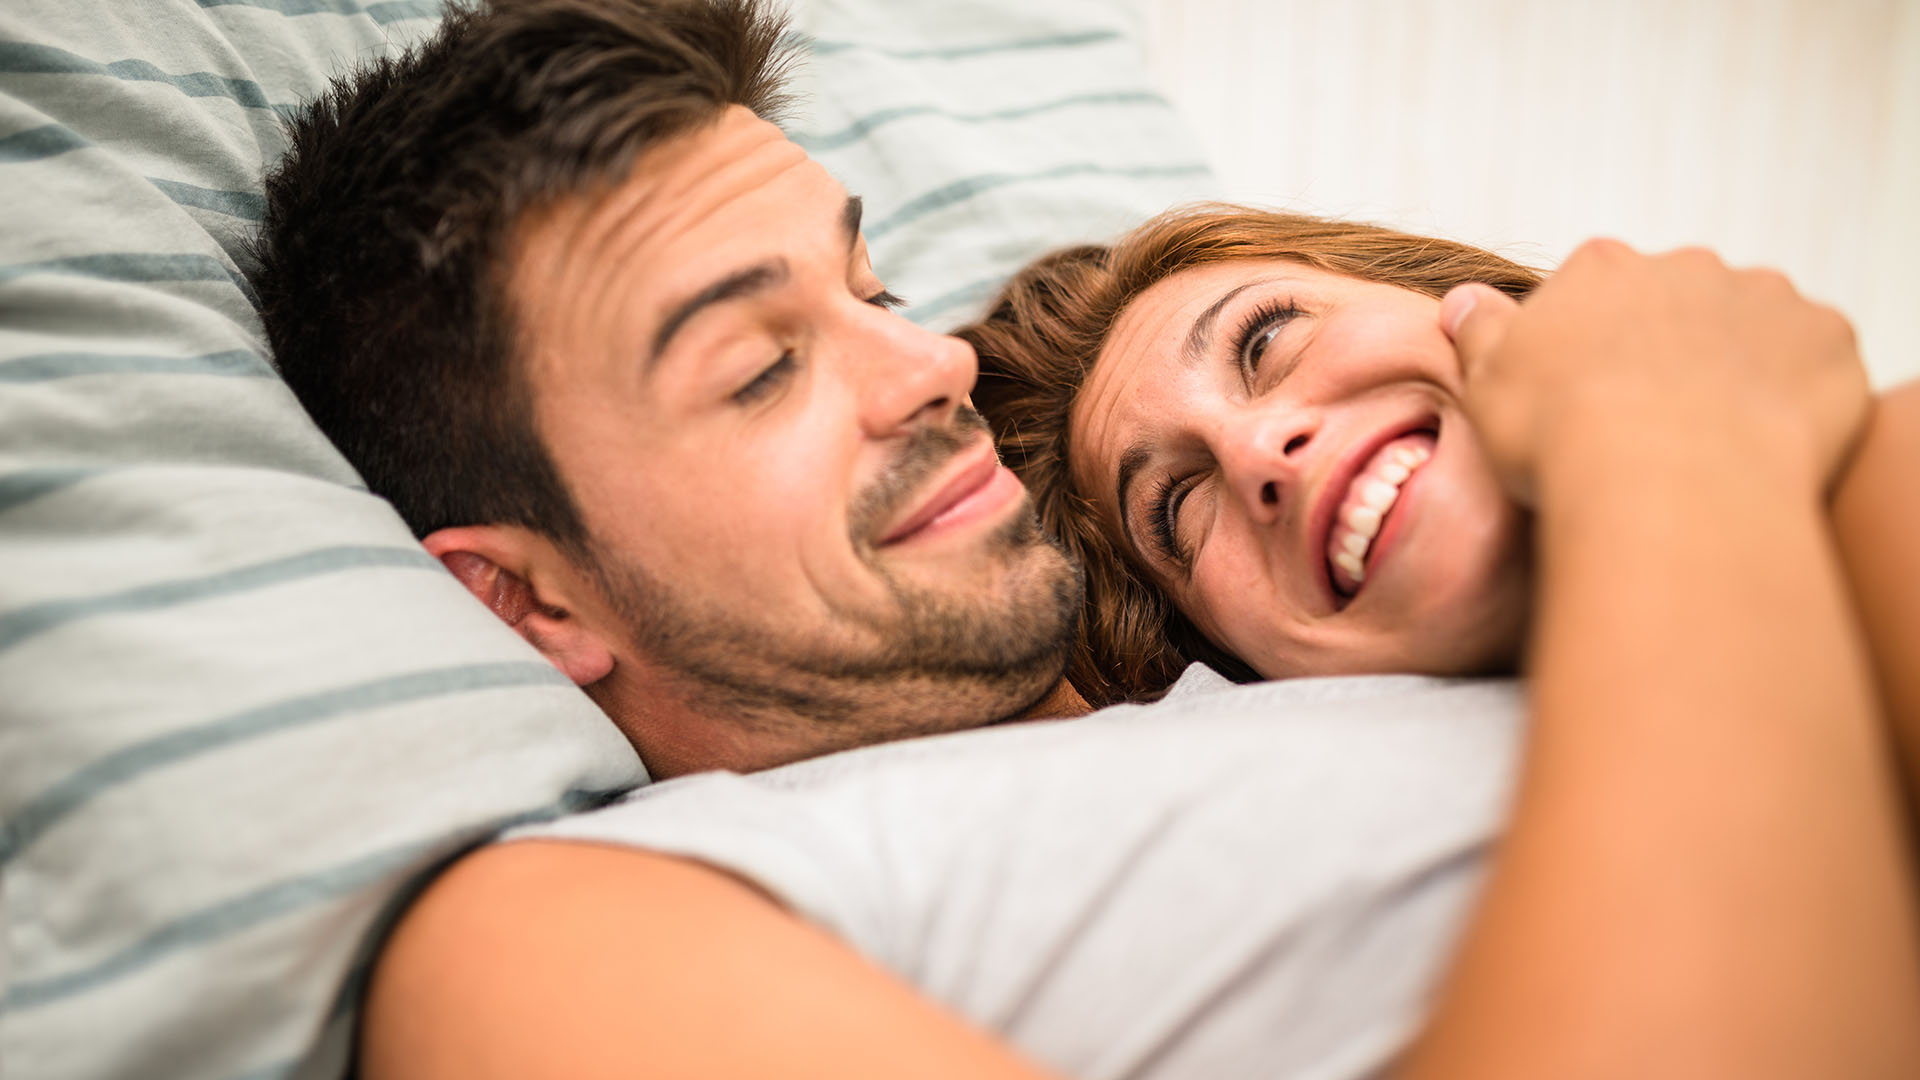 After intercourse, the release of chemicals such as oxytocin, prolactin, gamma-amnobutyric acid (GABA), and endorphins contribute to the feeling of being unable to regulate sleep (Getty Images)